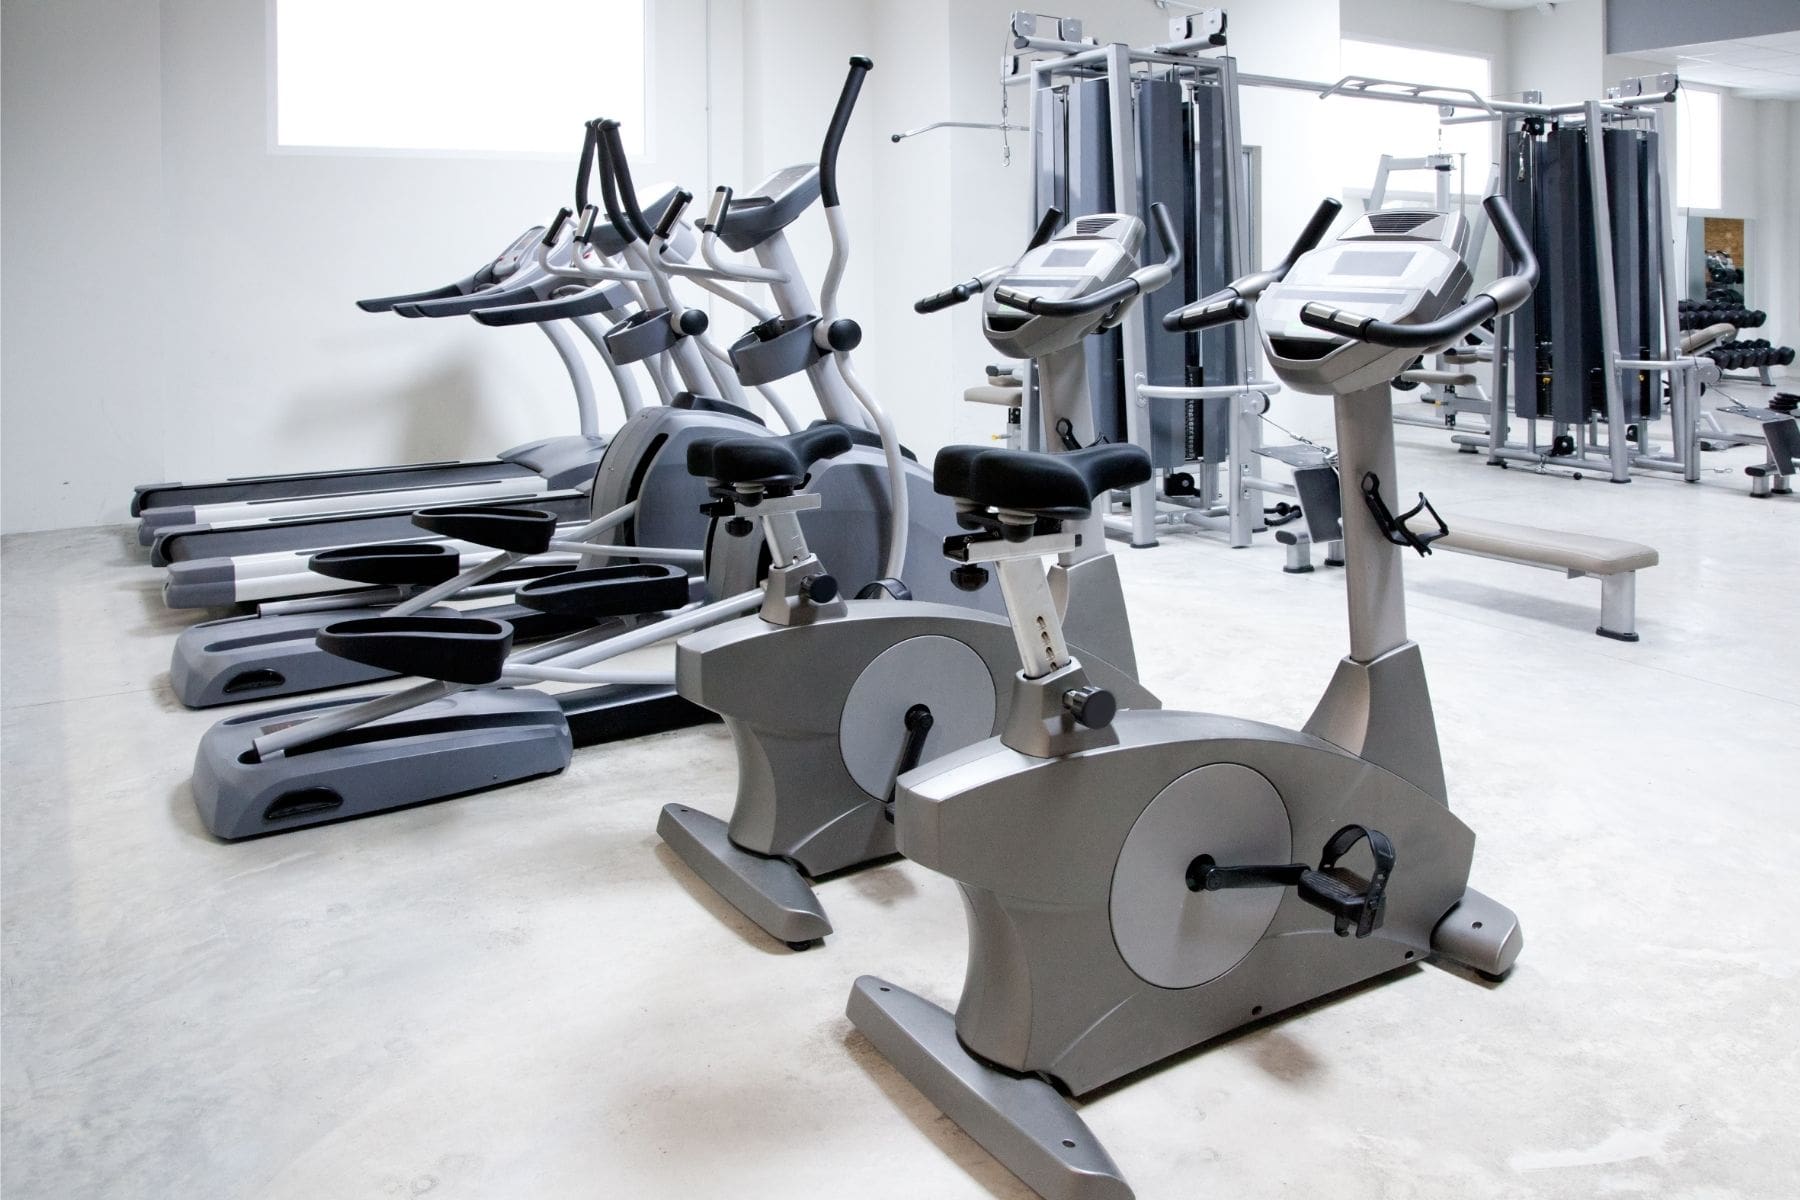 Elliptical Vs. Treadmill: Which Is Best for You?